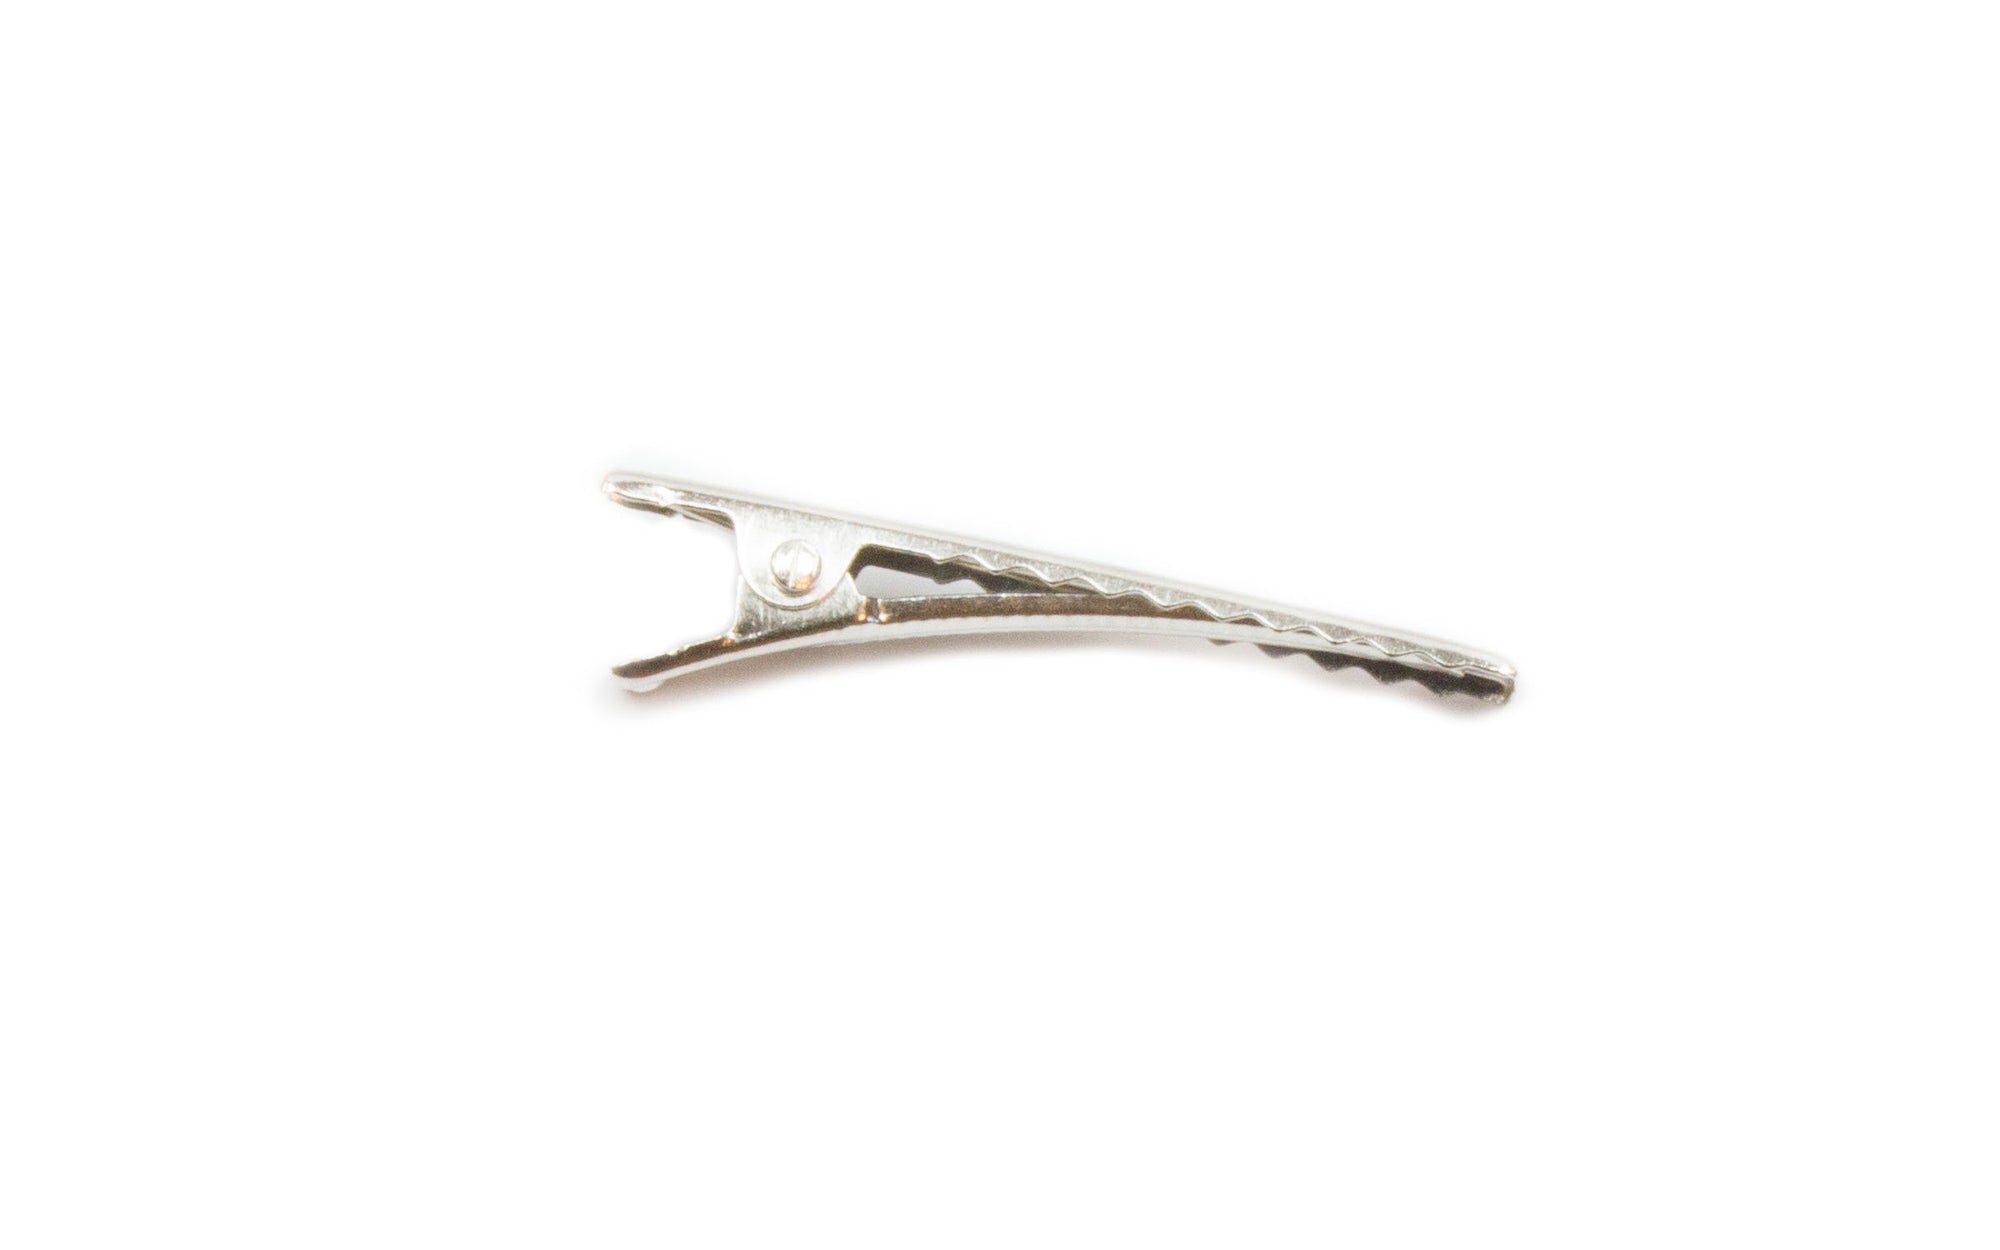  40 PCS Metal Wire Alligator Clips, Long-Tailed